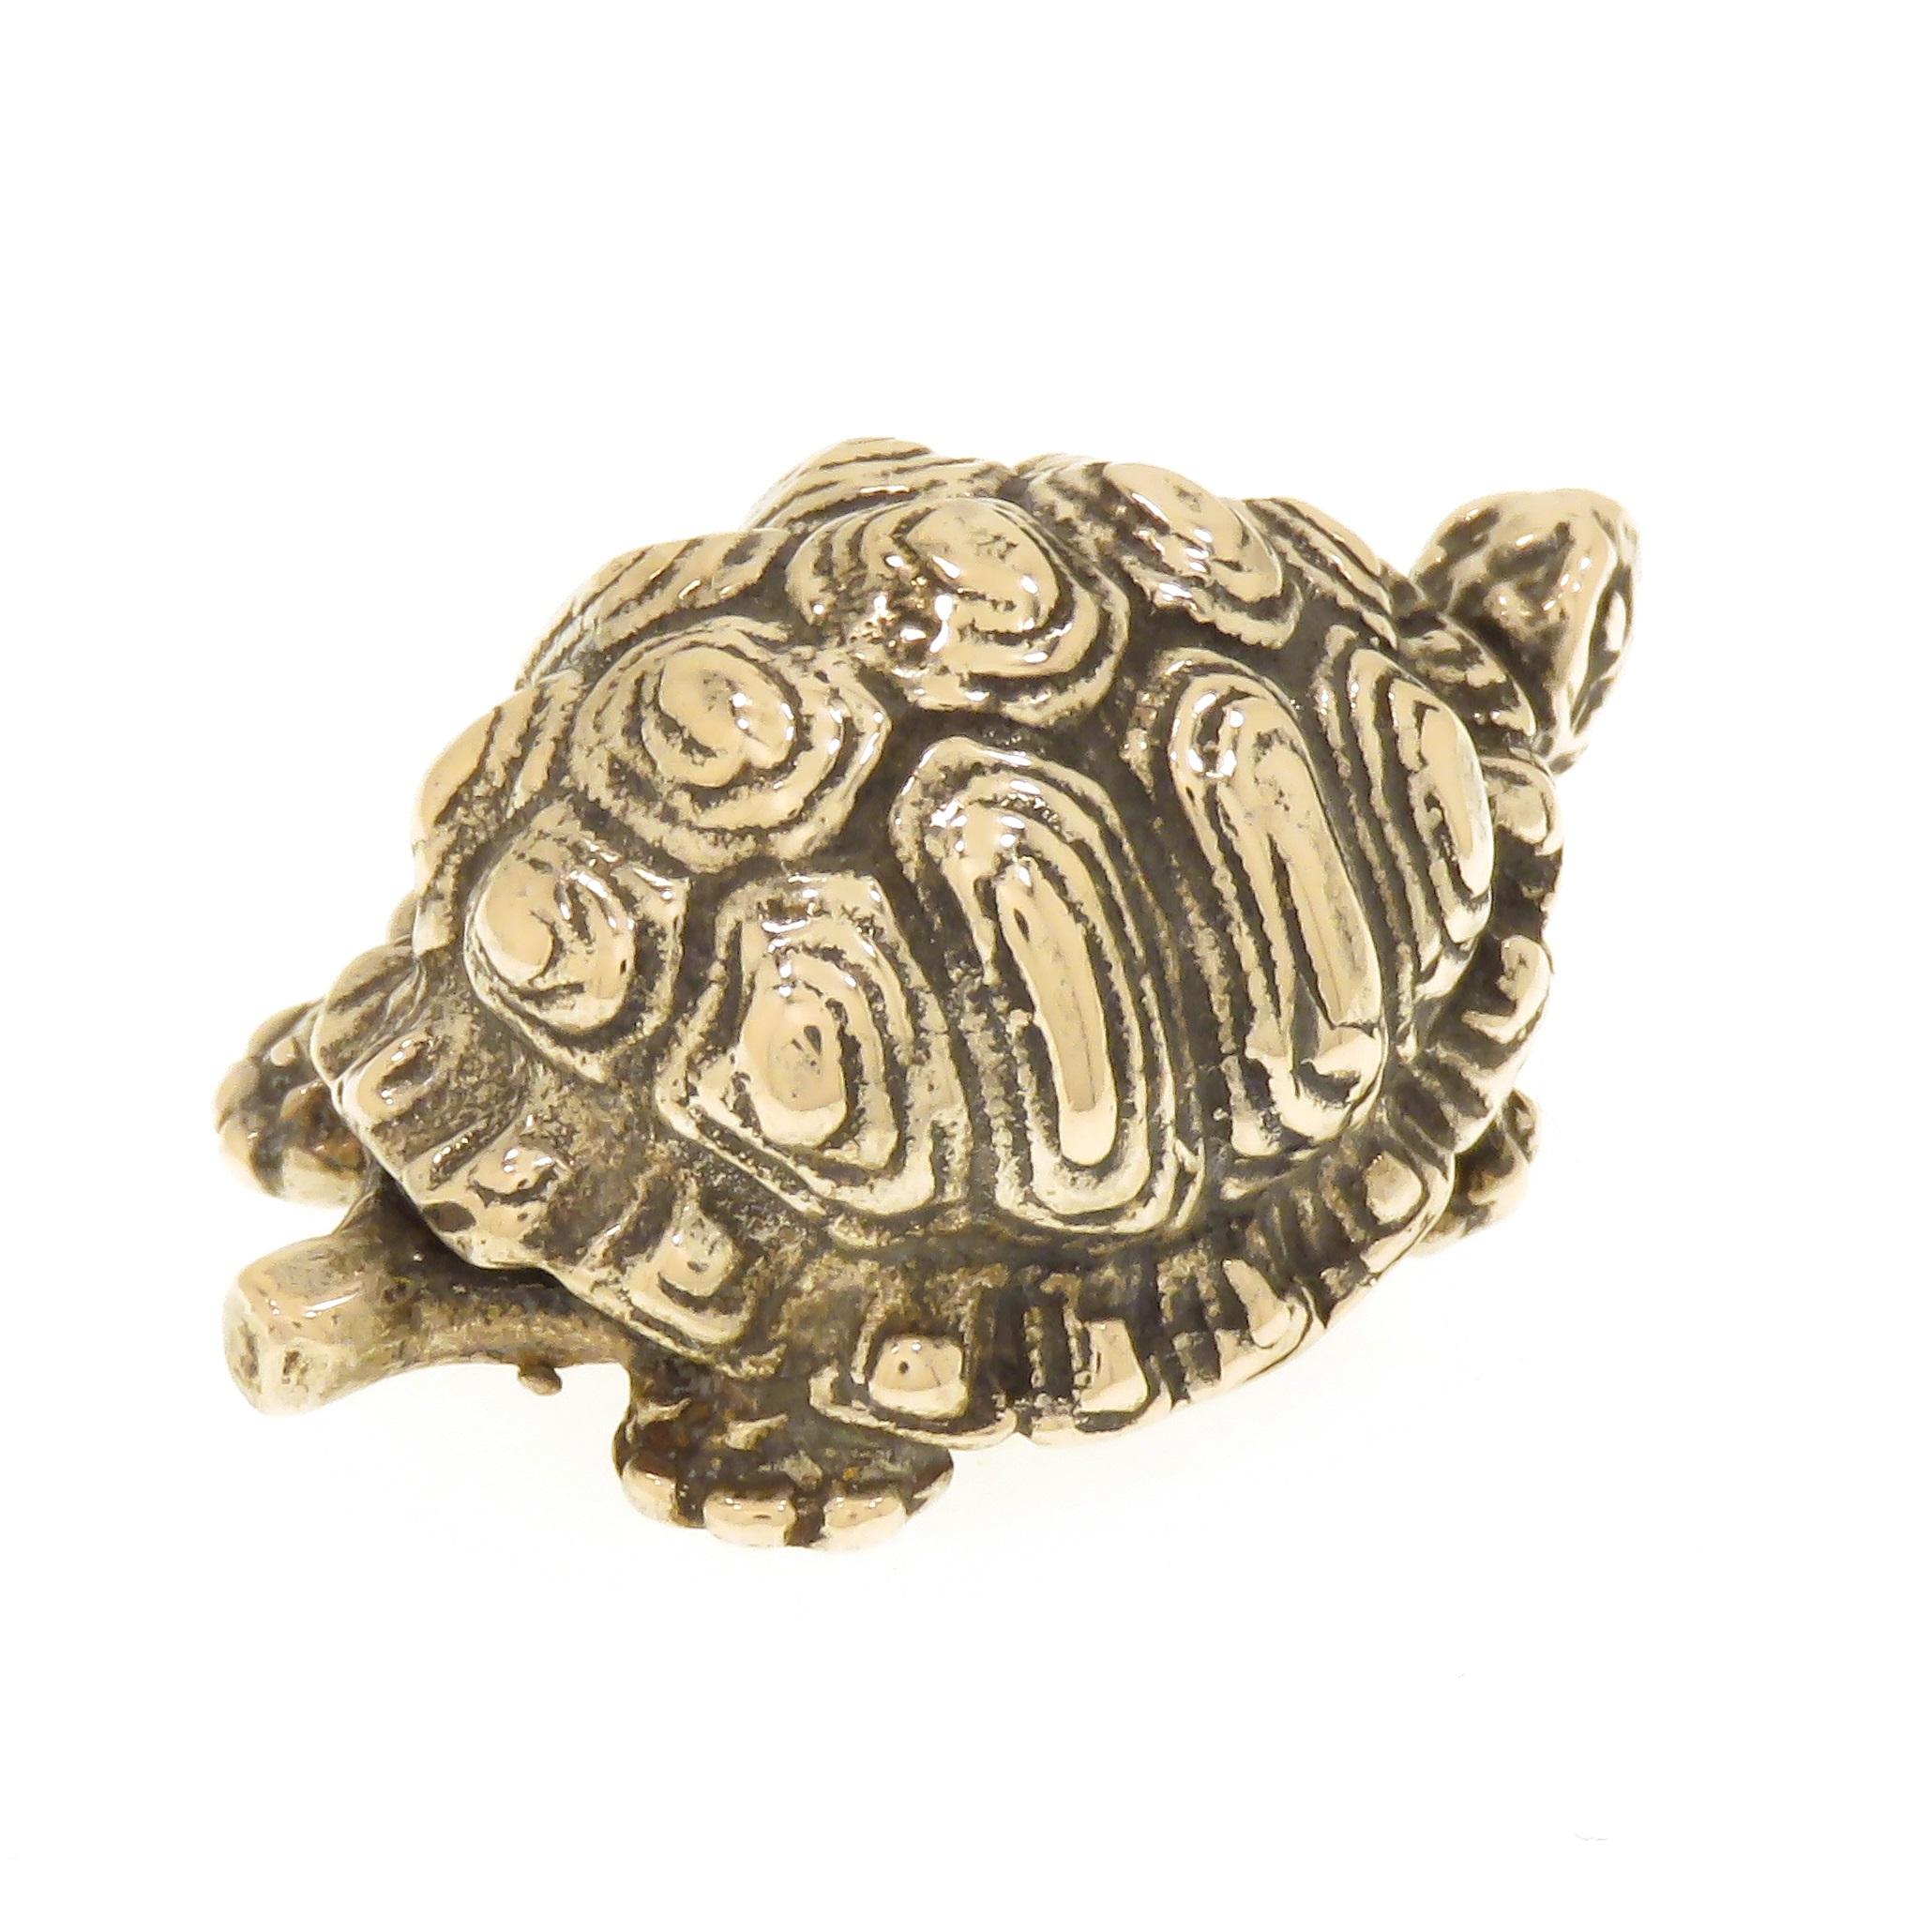 Retro Solid Silver Turtle Figurine Vintage 1970s Made in Italy For Sale